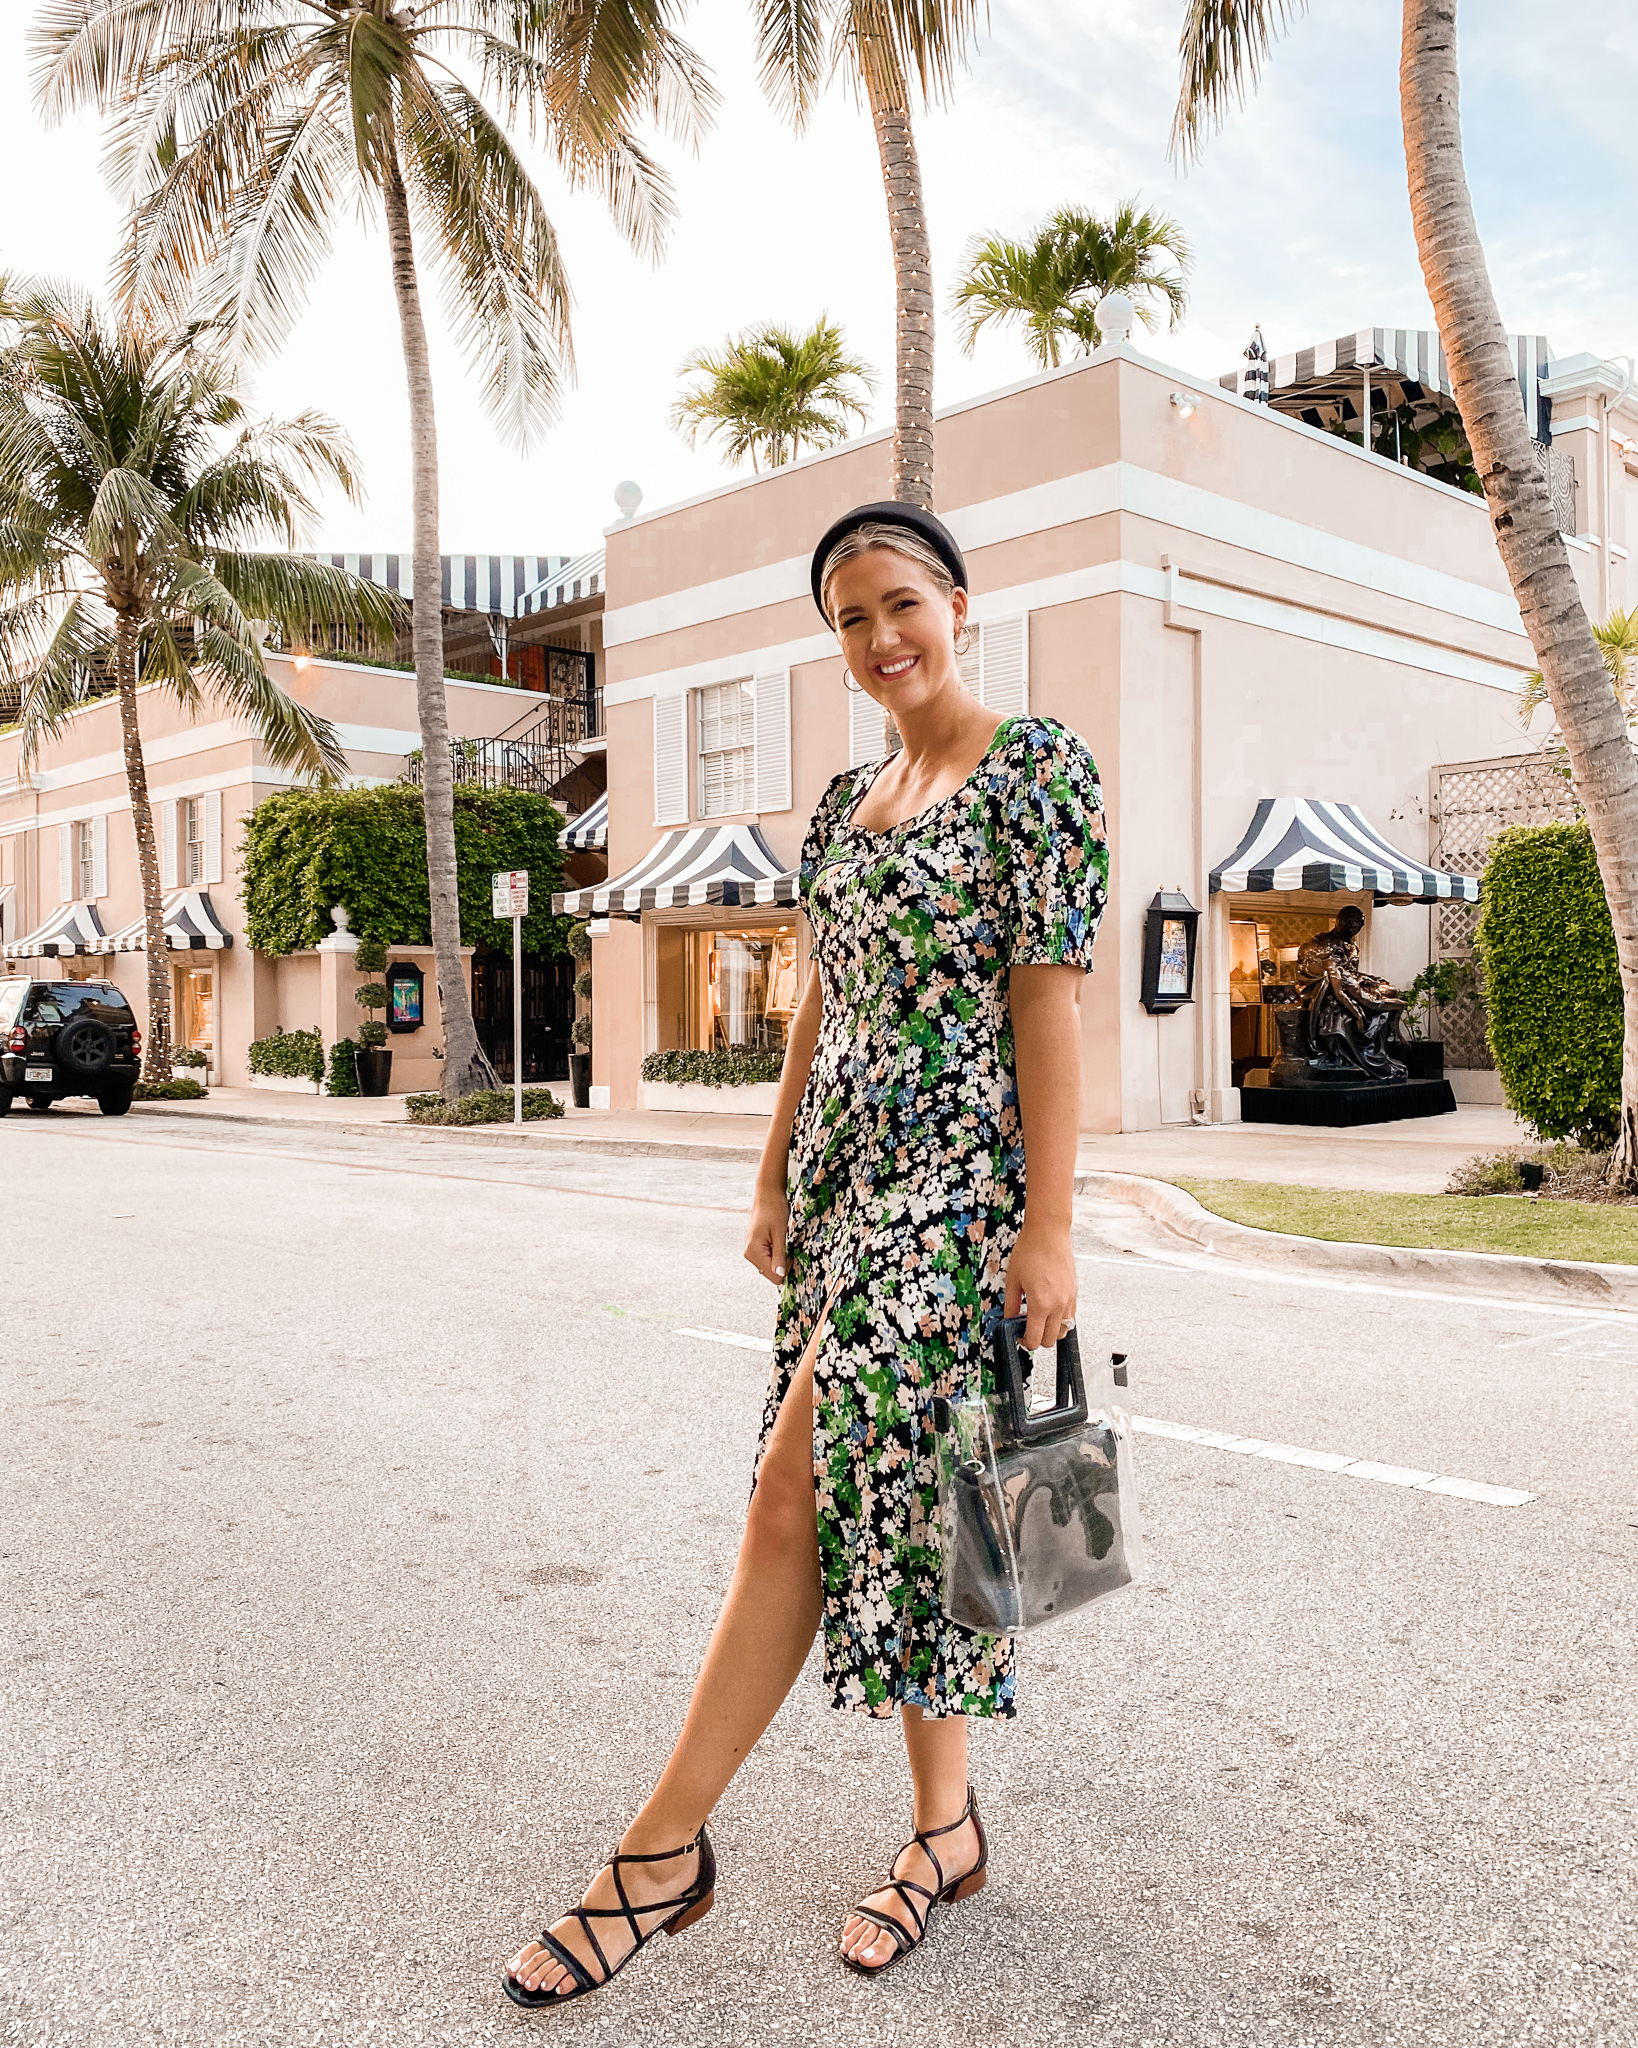 Anna wearing a dress standing in the street of a tropical place with palm trees in the background.